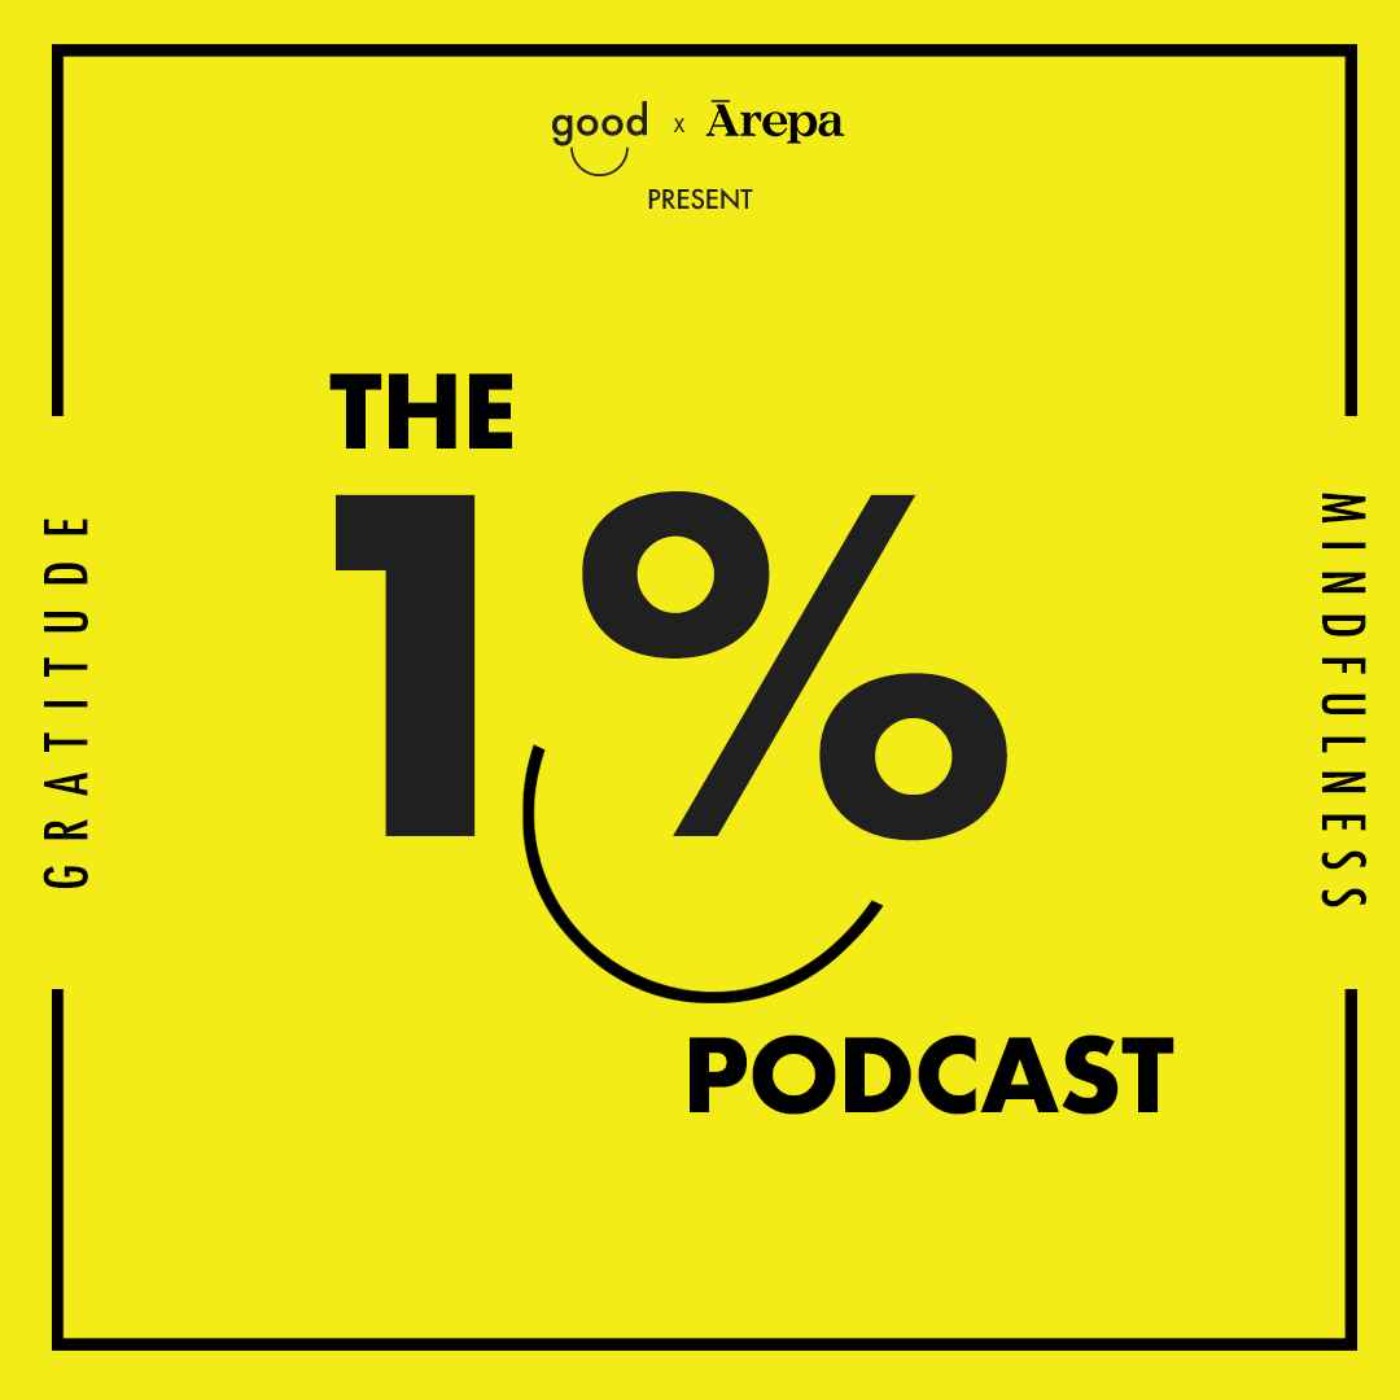 1% Pod - The lessons I want to take..